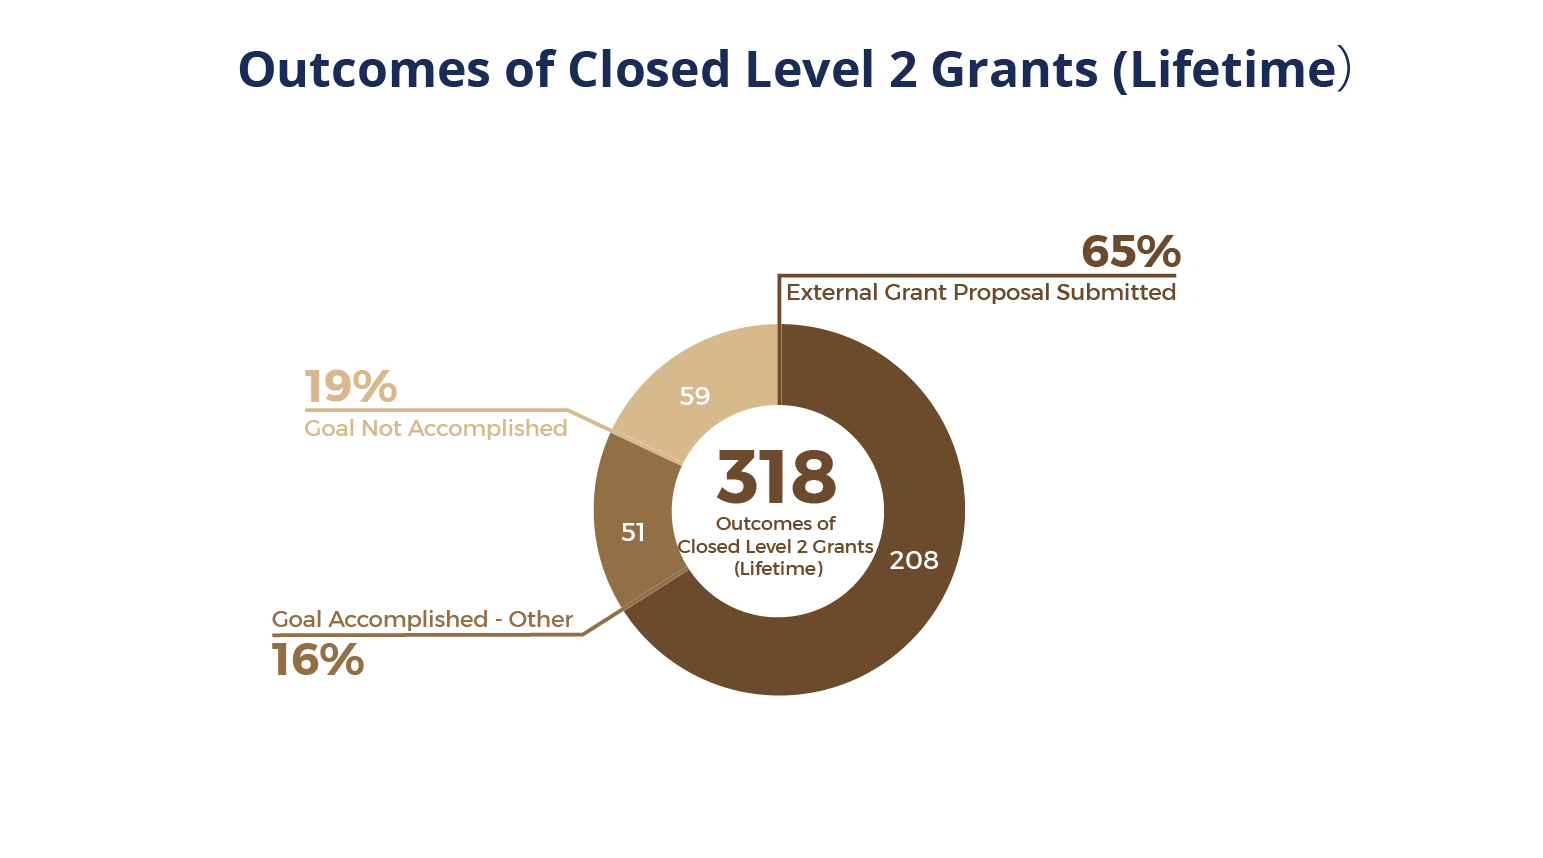 Pie chart of Outcomes of Closed Level 2 Grants (Lifetime).